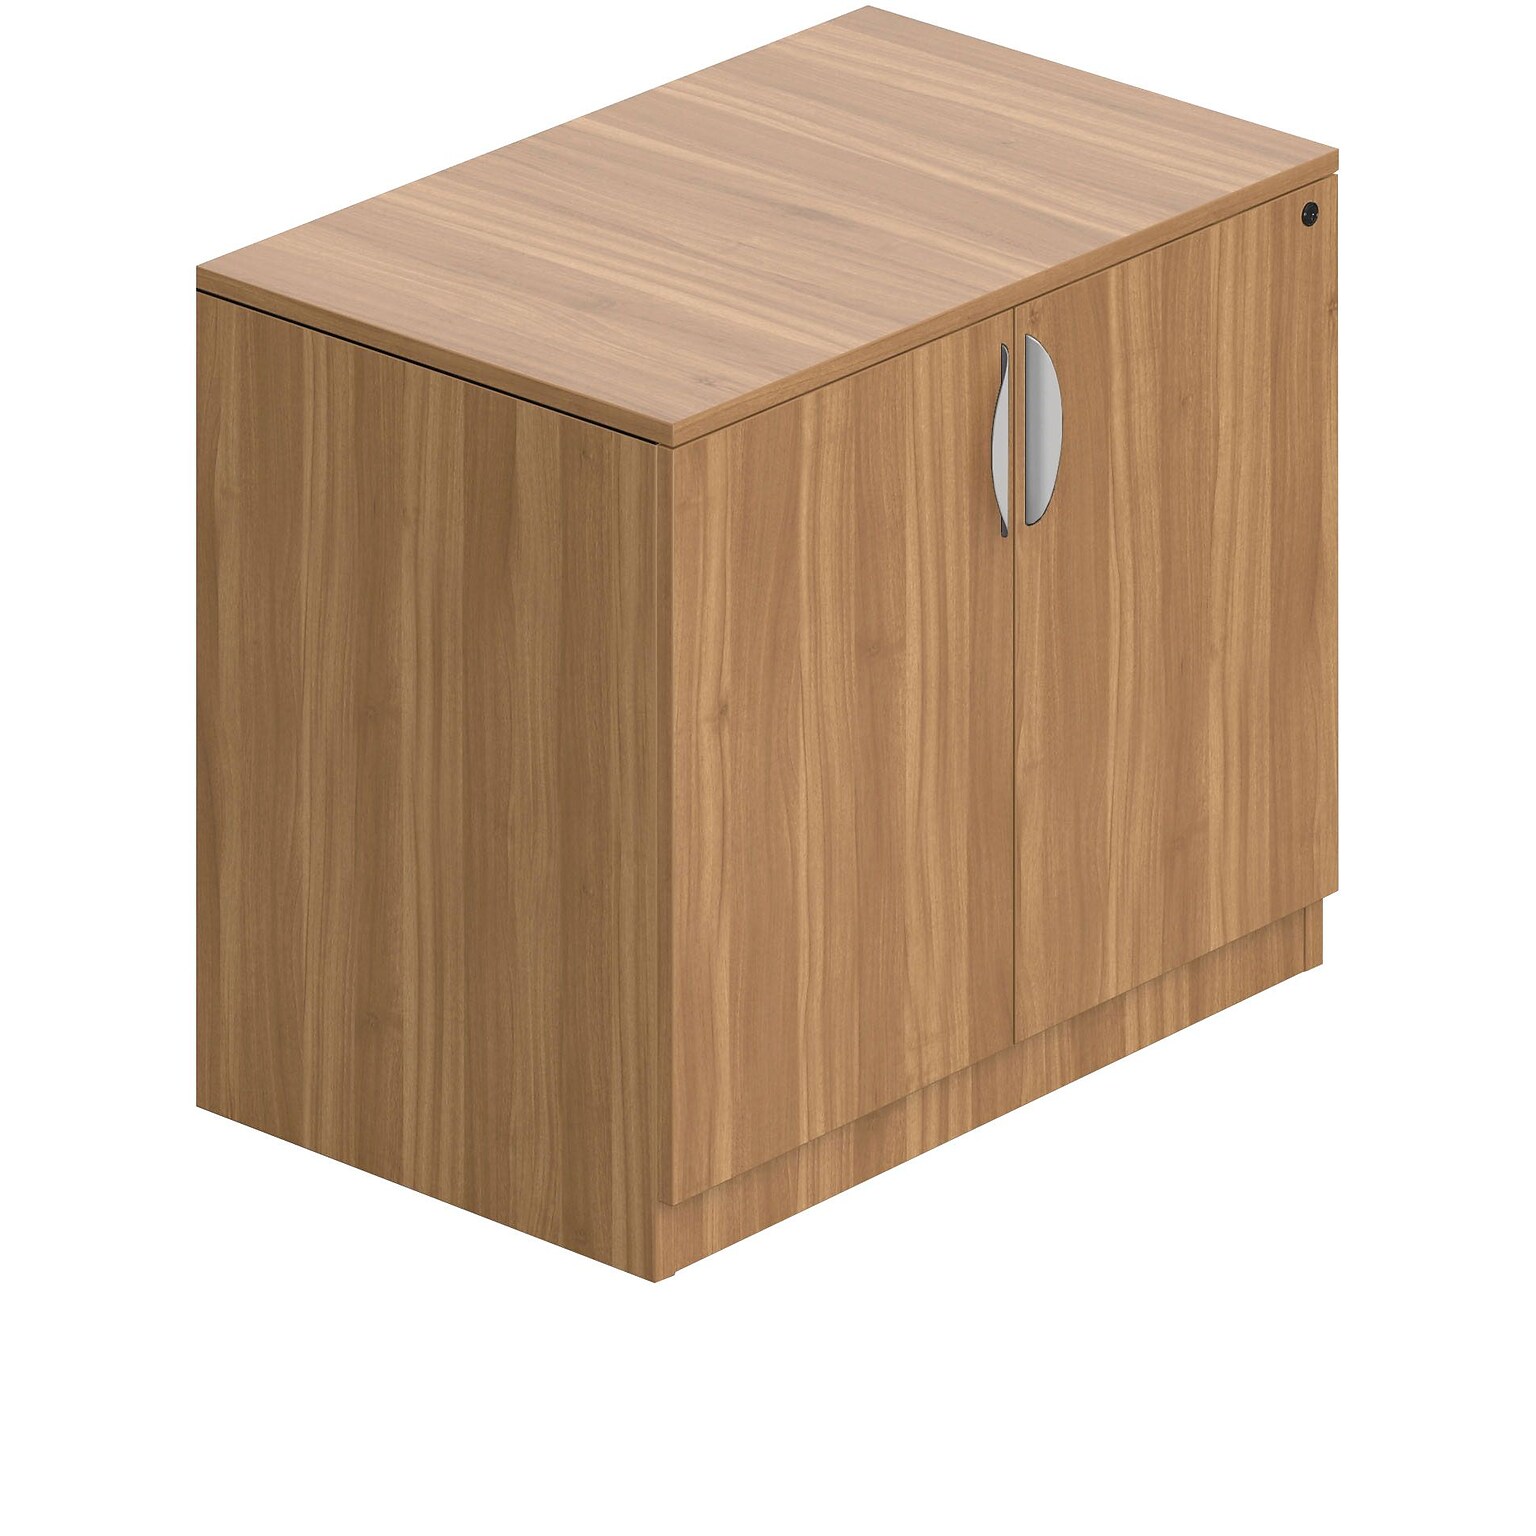 Offices To Go Superior Laminate Storage Cabinet with Lock, Autumn Walnut (TDSL3622SC-AWL)